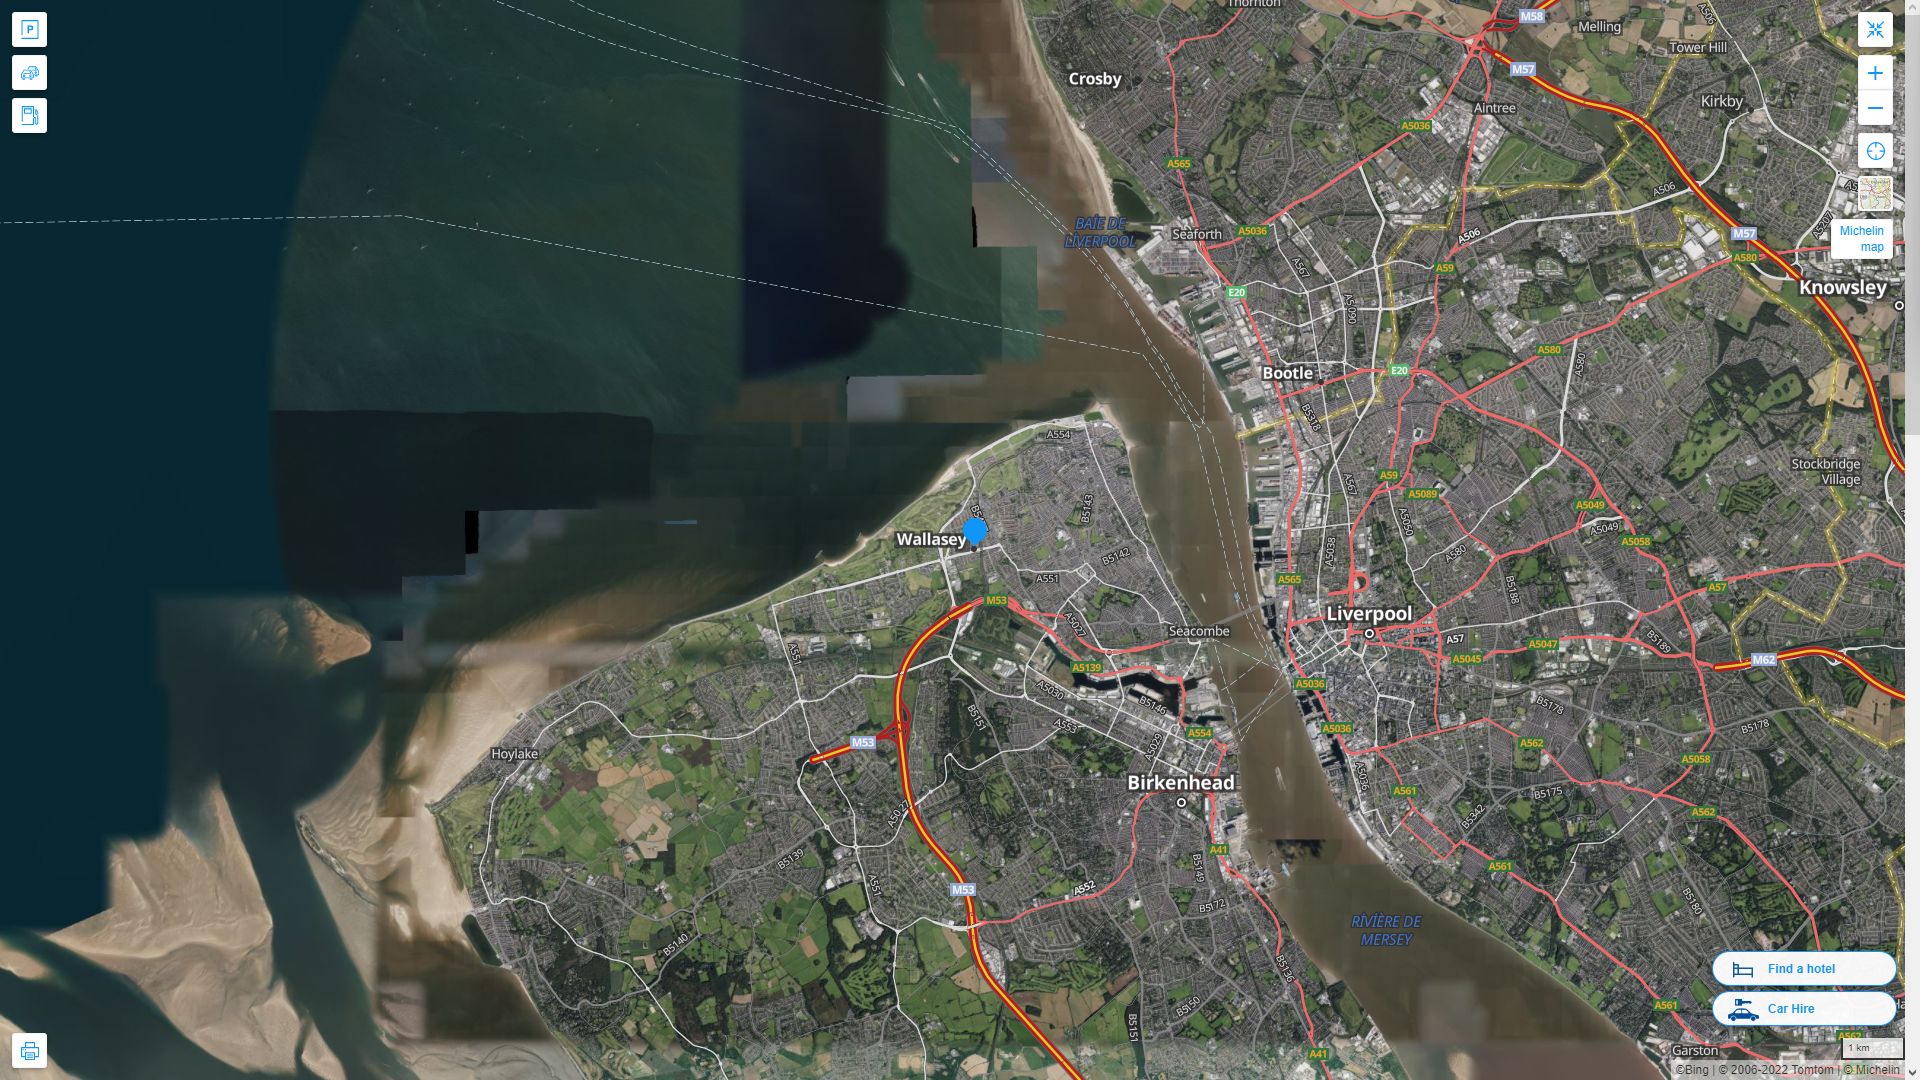 Wallasey Highway and Road Map with Satellite View